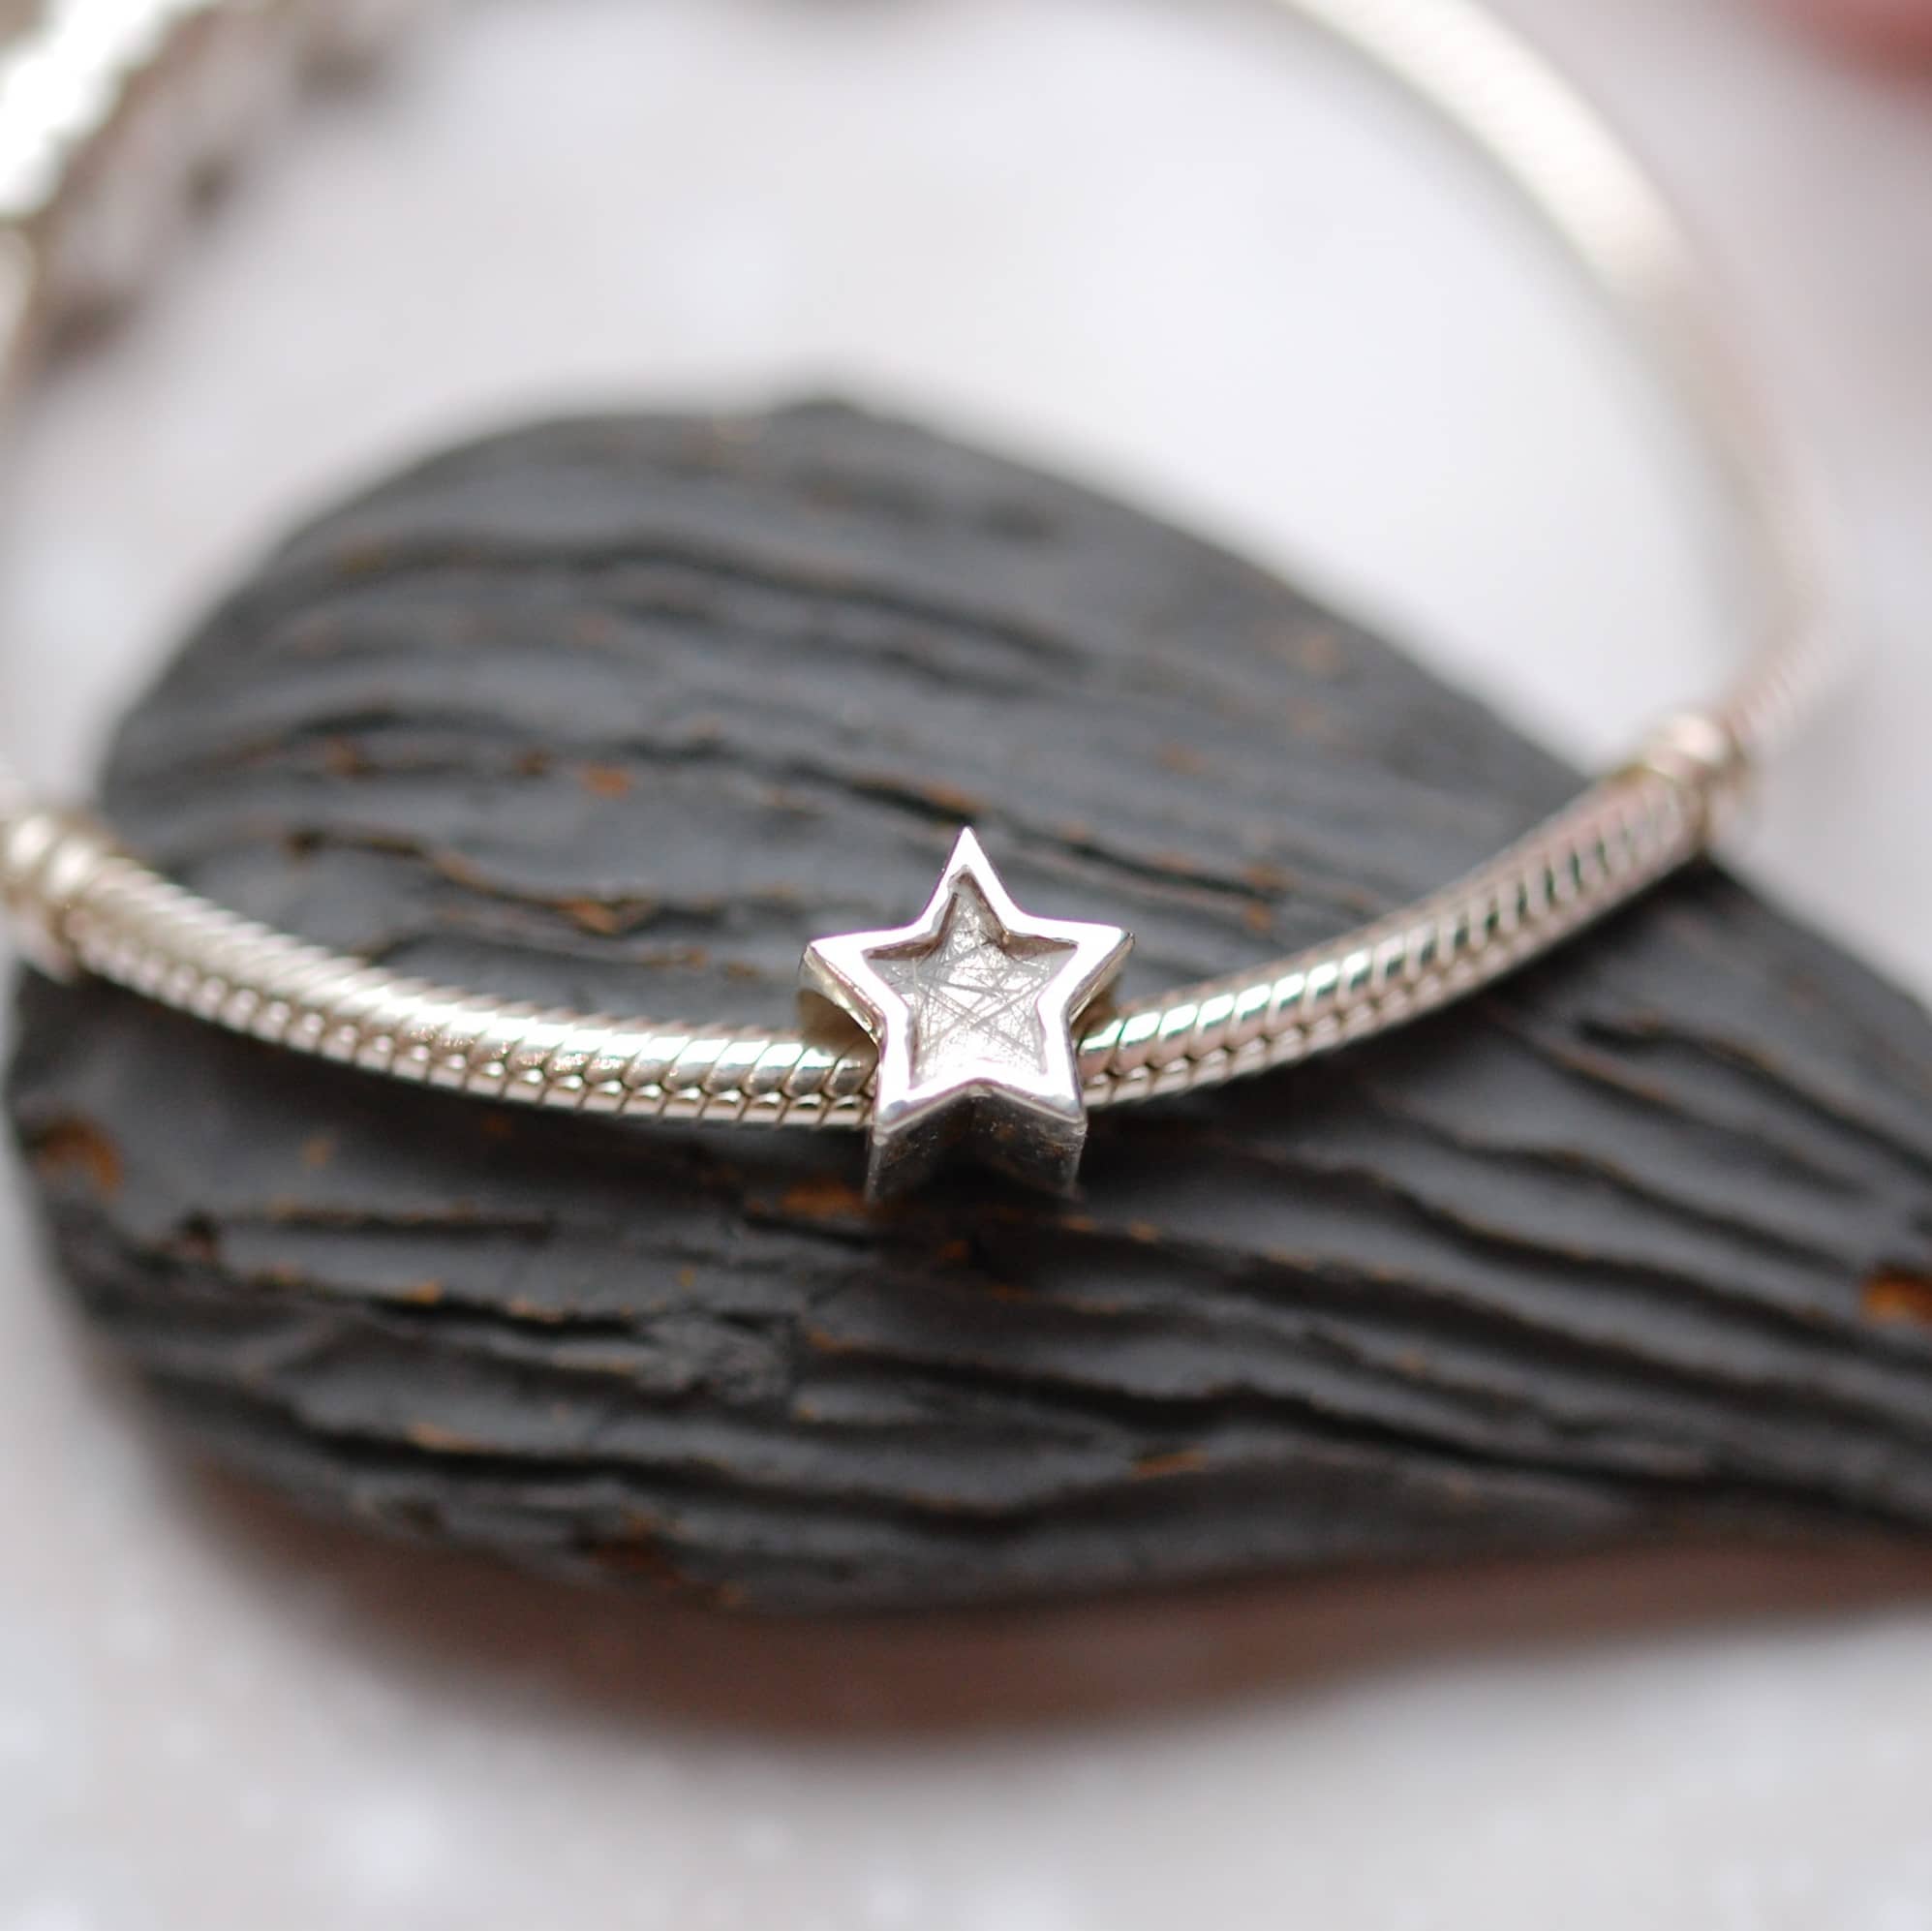 Star charm bead with pet fur or cremation ashes